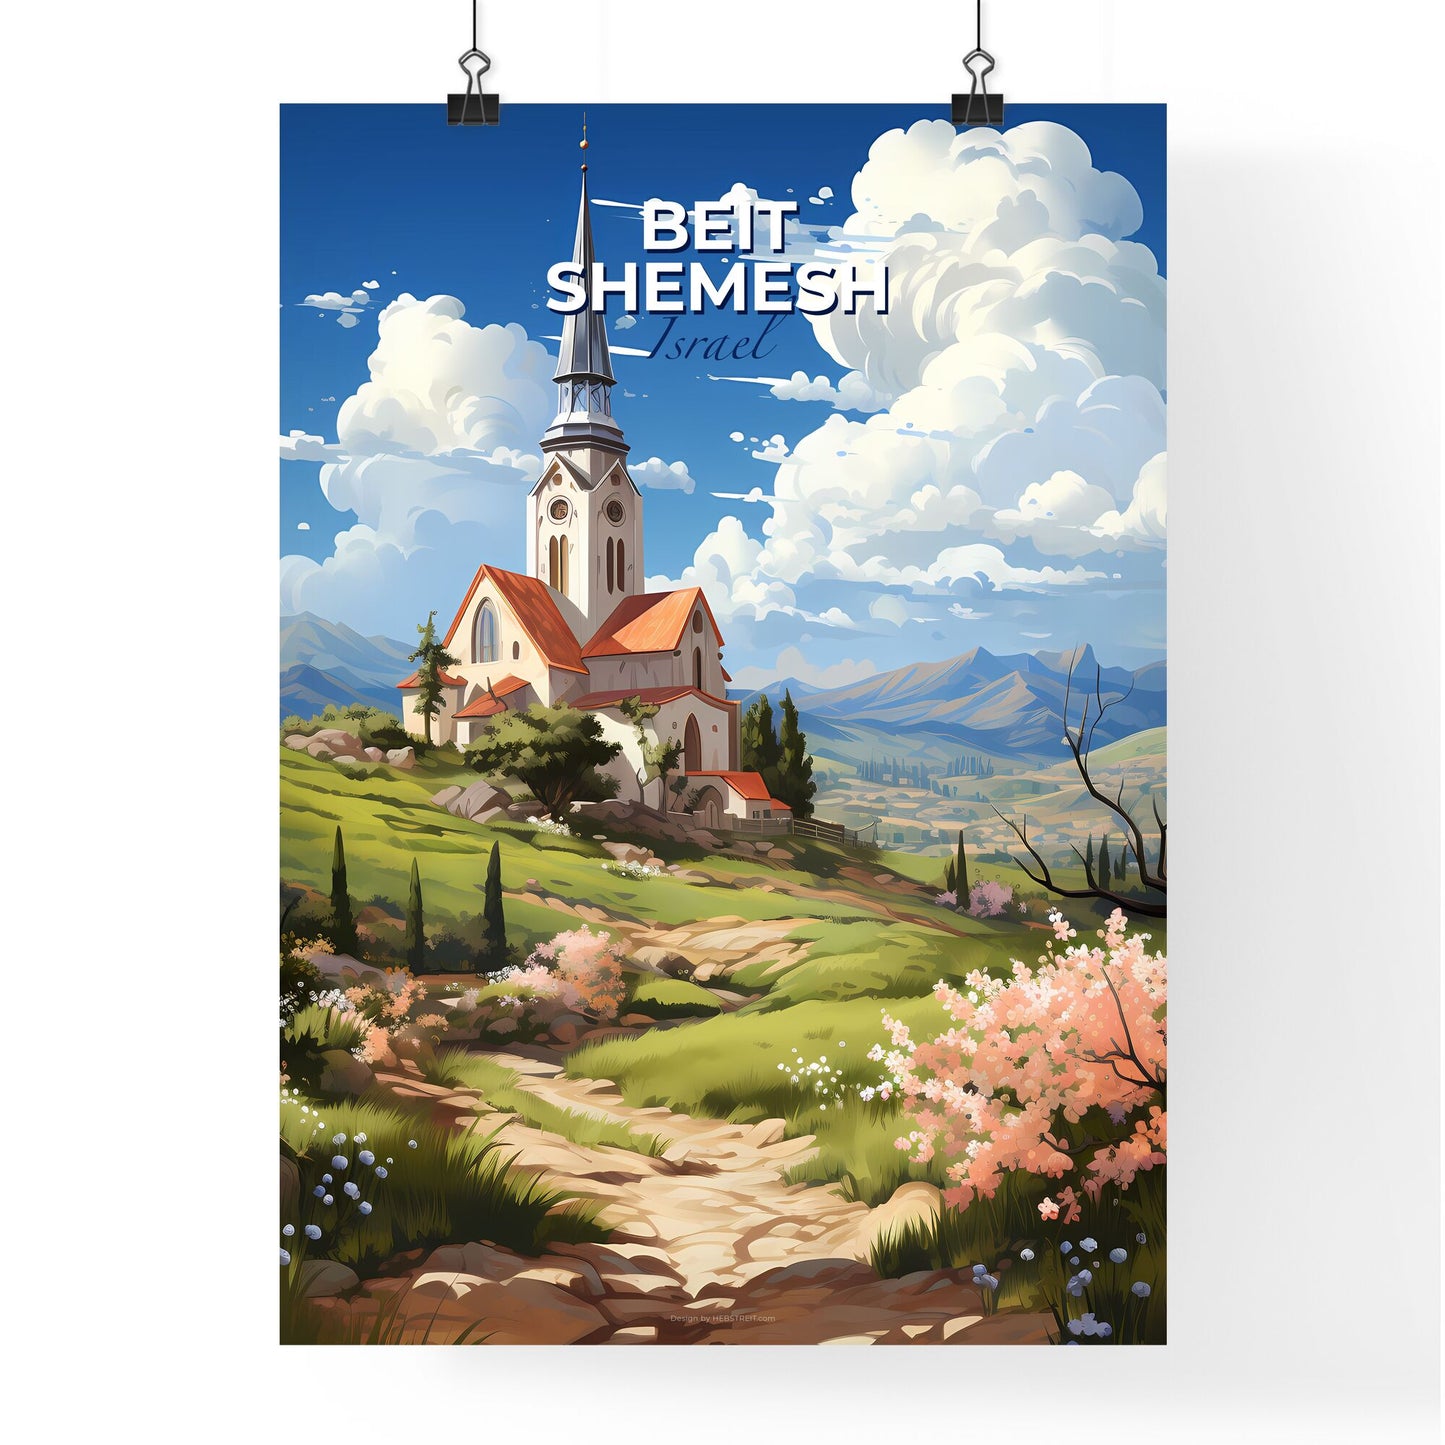 Vibrant Artistic Depiction of Beit Shemesh Skyline Featuring a Church on a Hill Amidst Nature Default Title